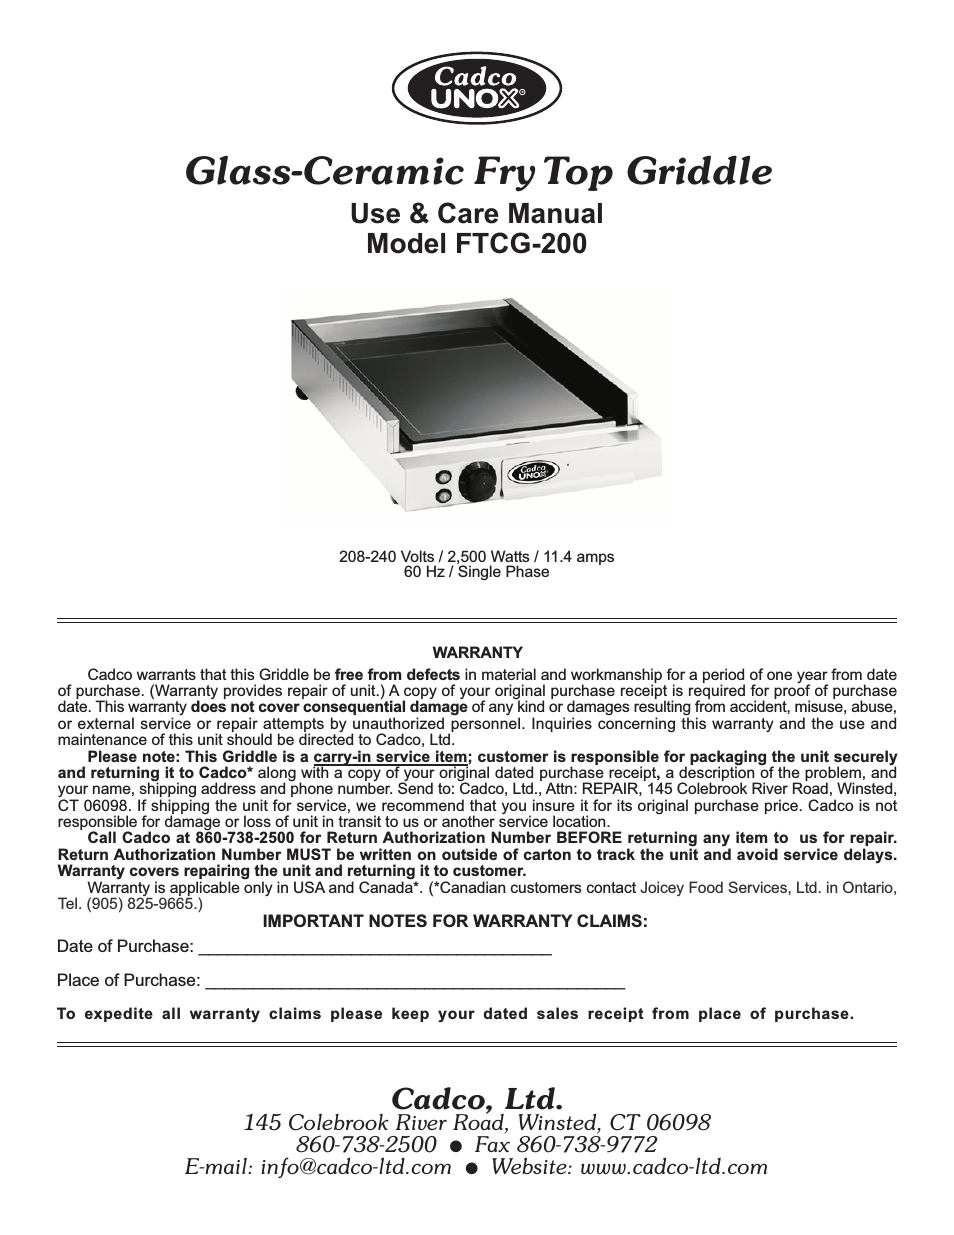 GLASS-CERAMIC FRY TOP GRIDDLE FTCG-200